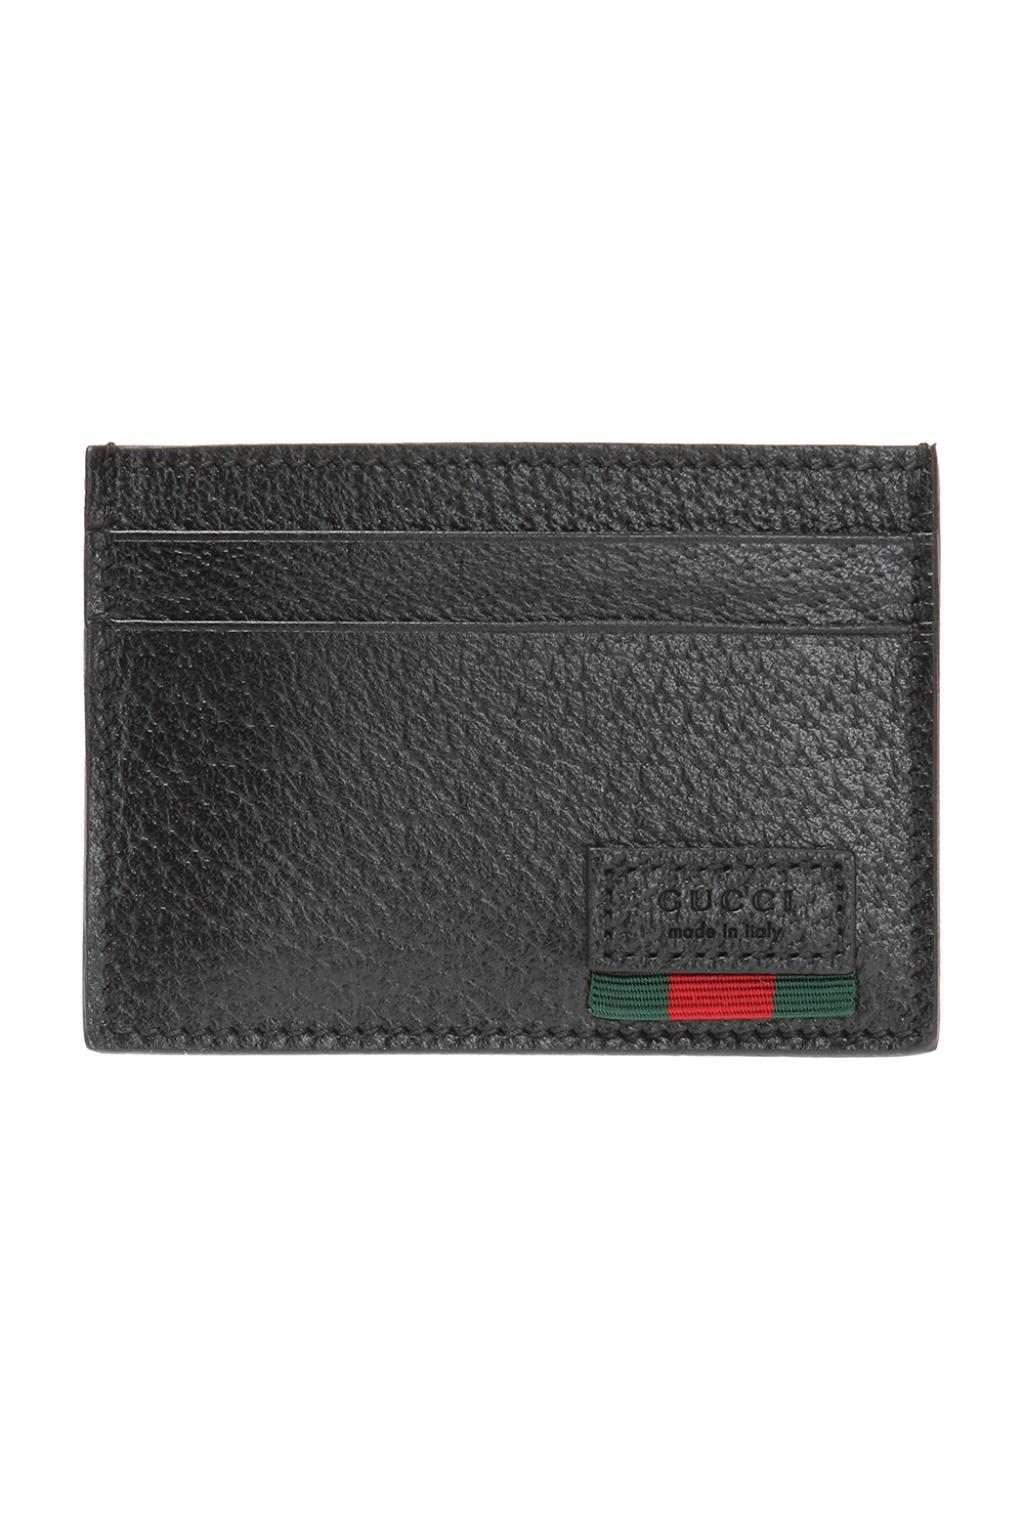 gucci card case with money clip